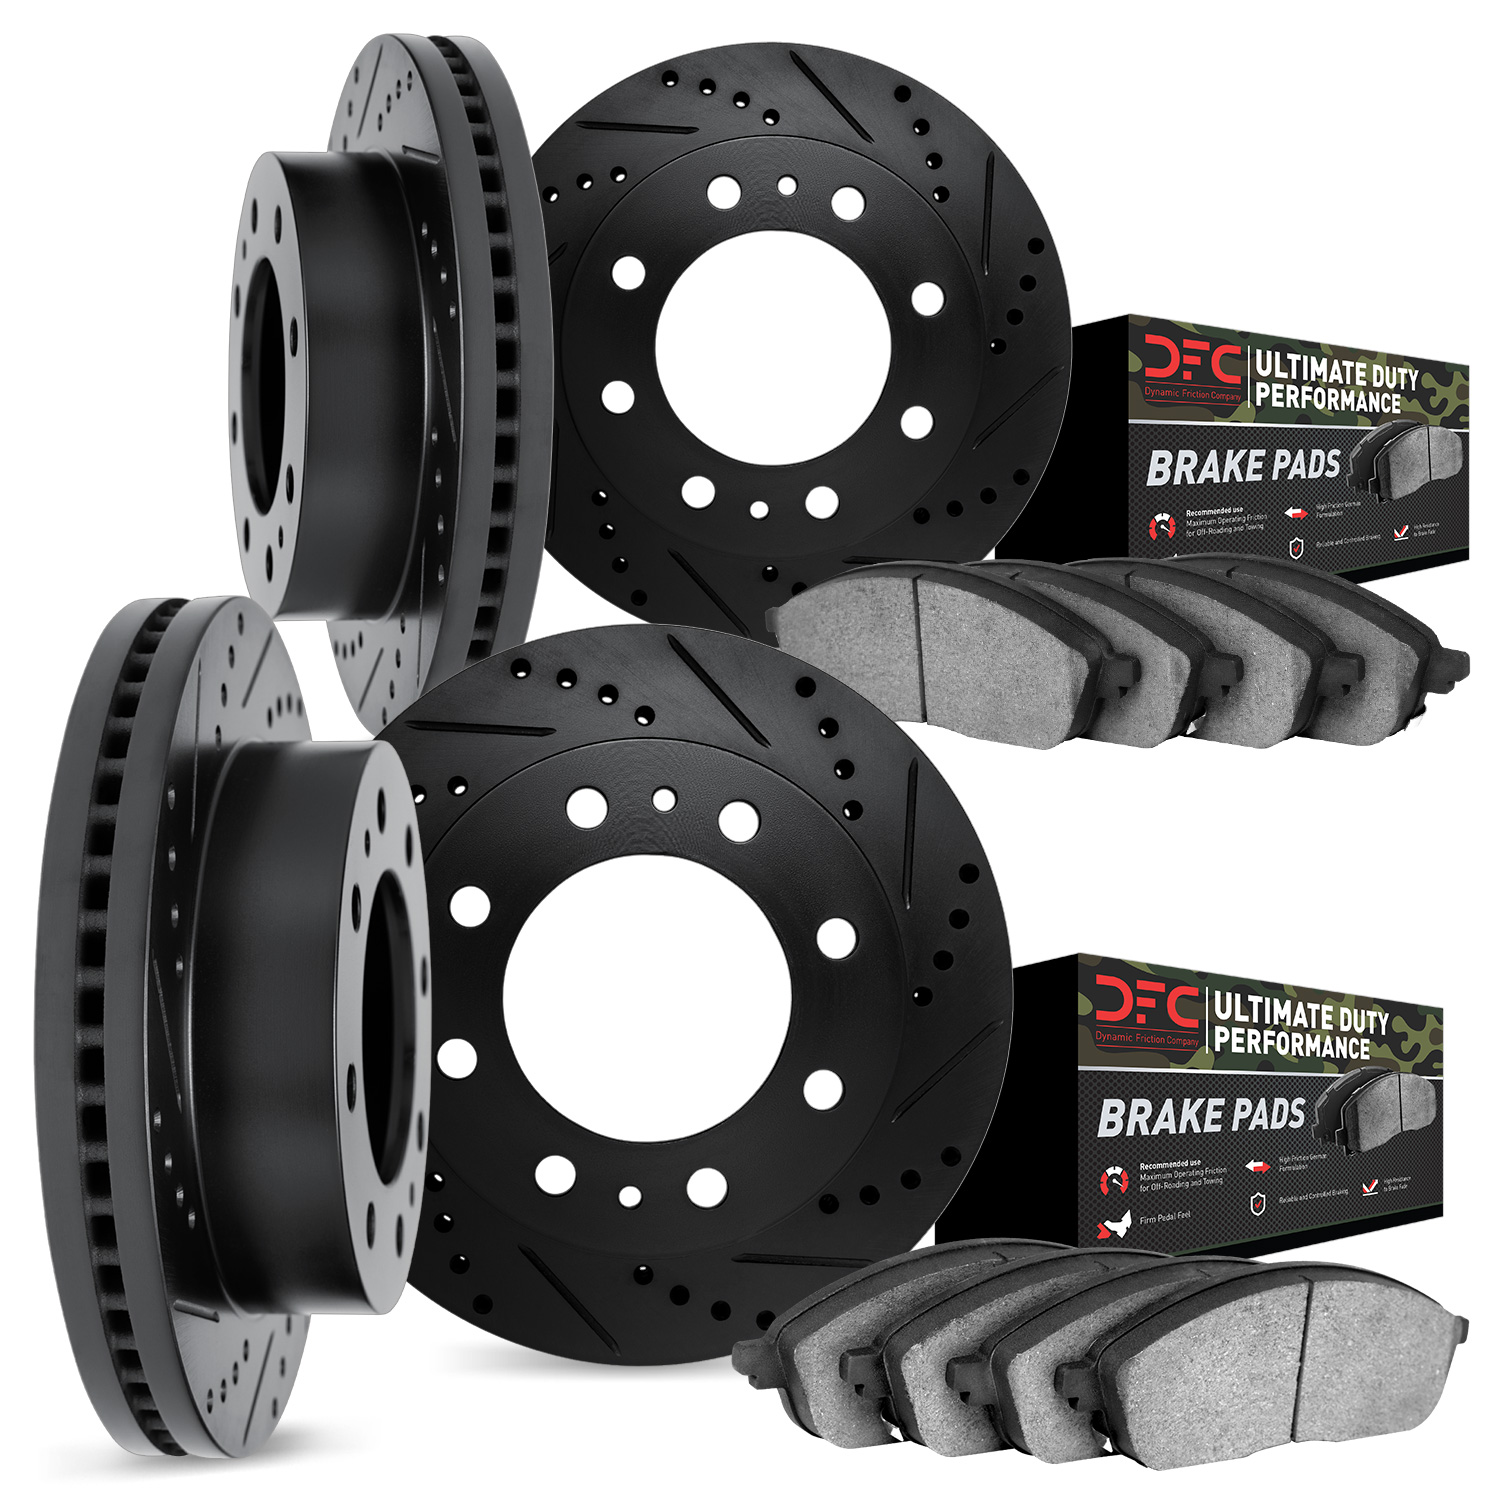 8404-48021 Drilled/Slotted Brake Rotors with Ultimate-Duty Brake Pads Kit [Black], 2011-2019 GM, Position: Front and Rear